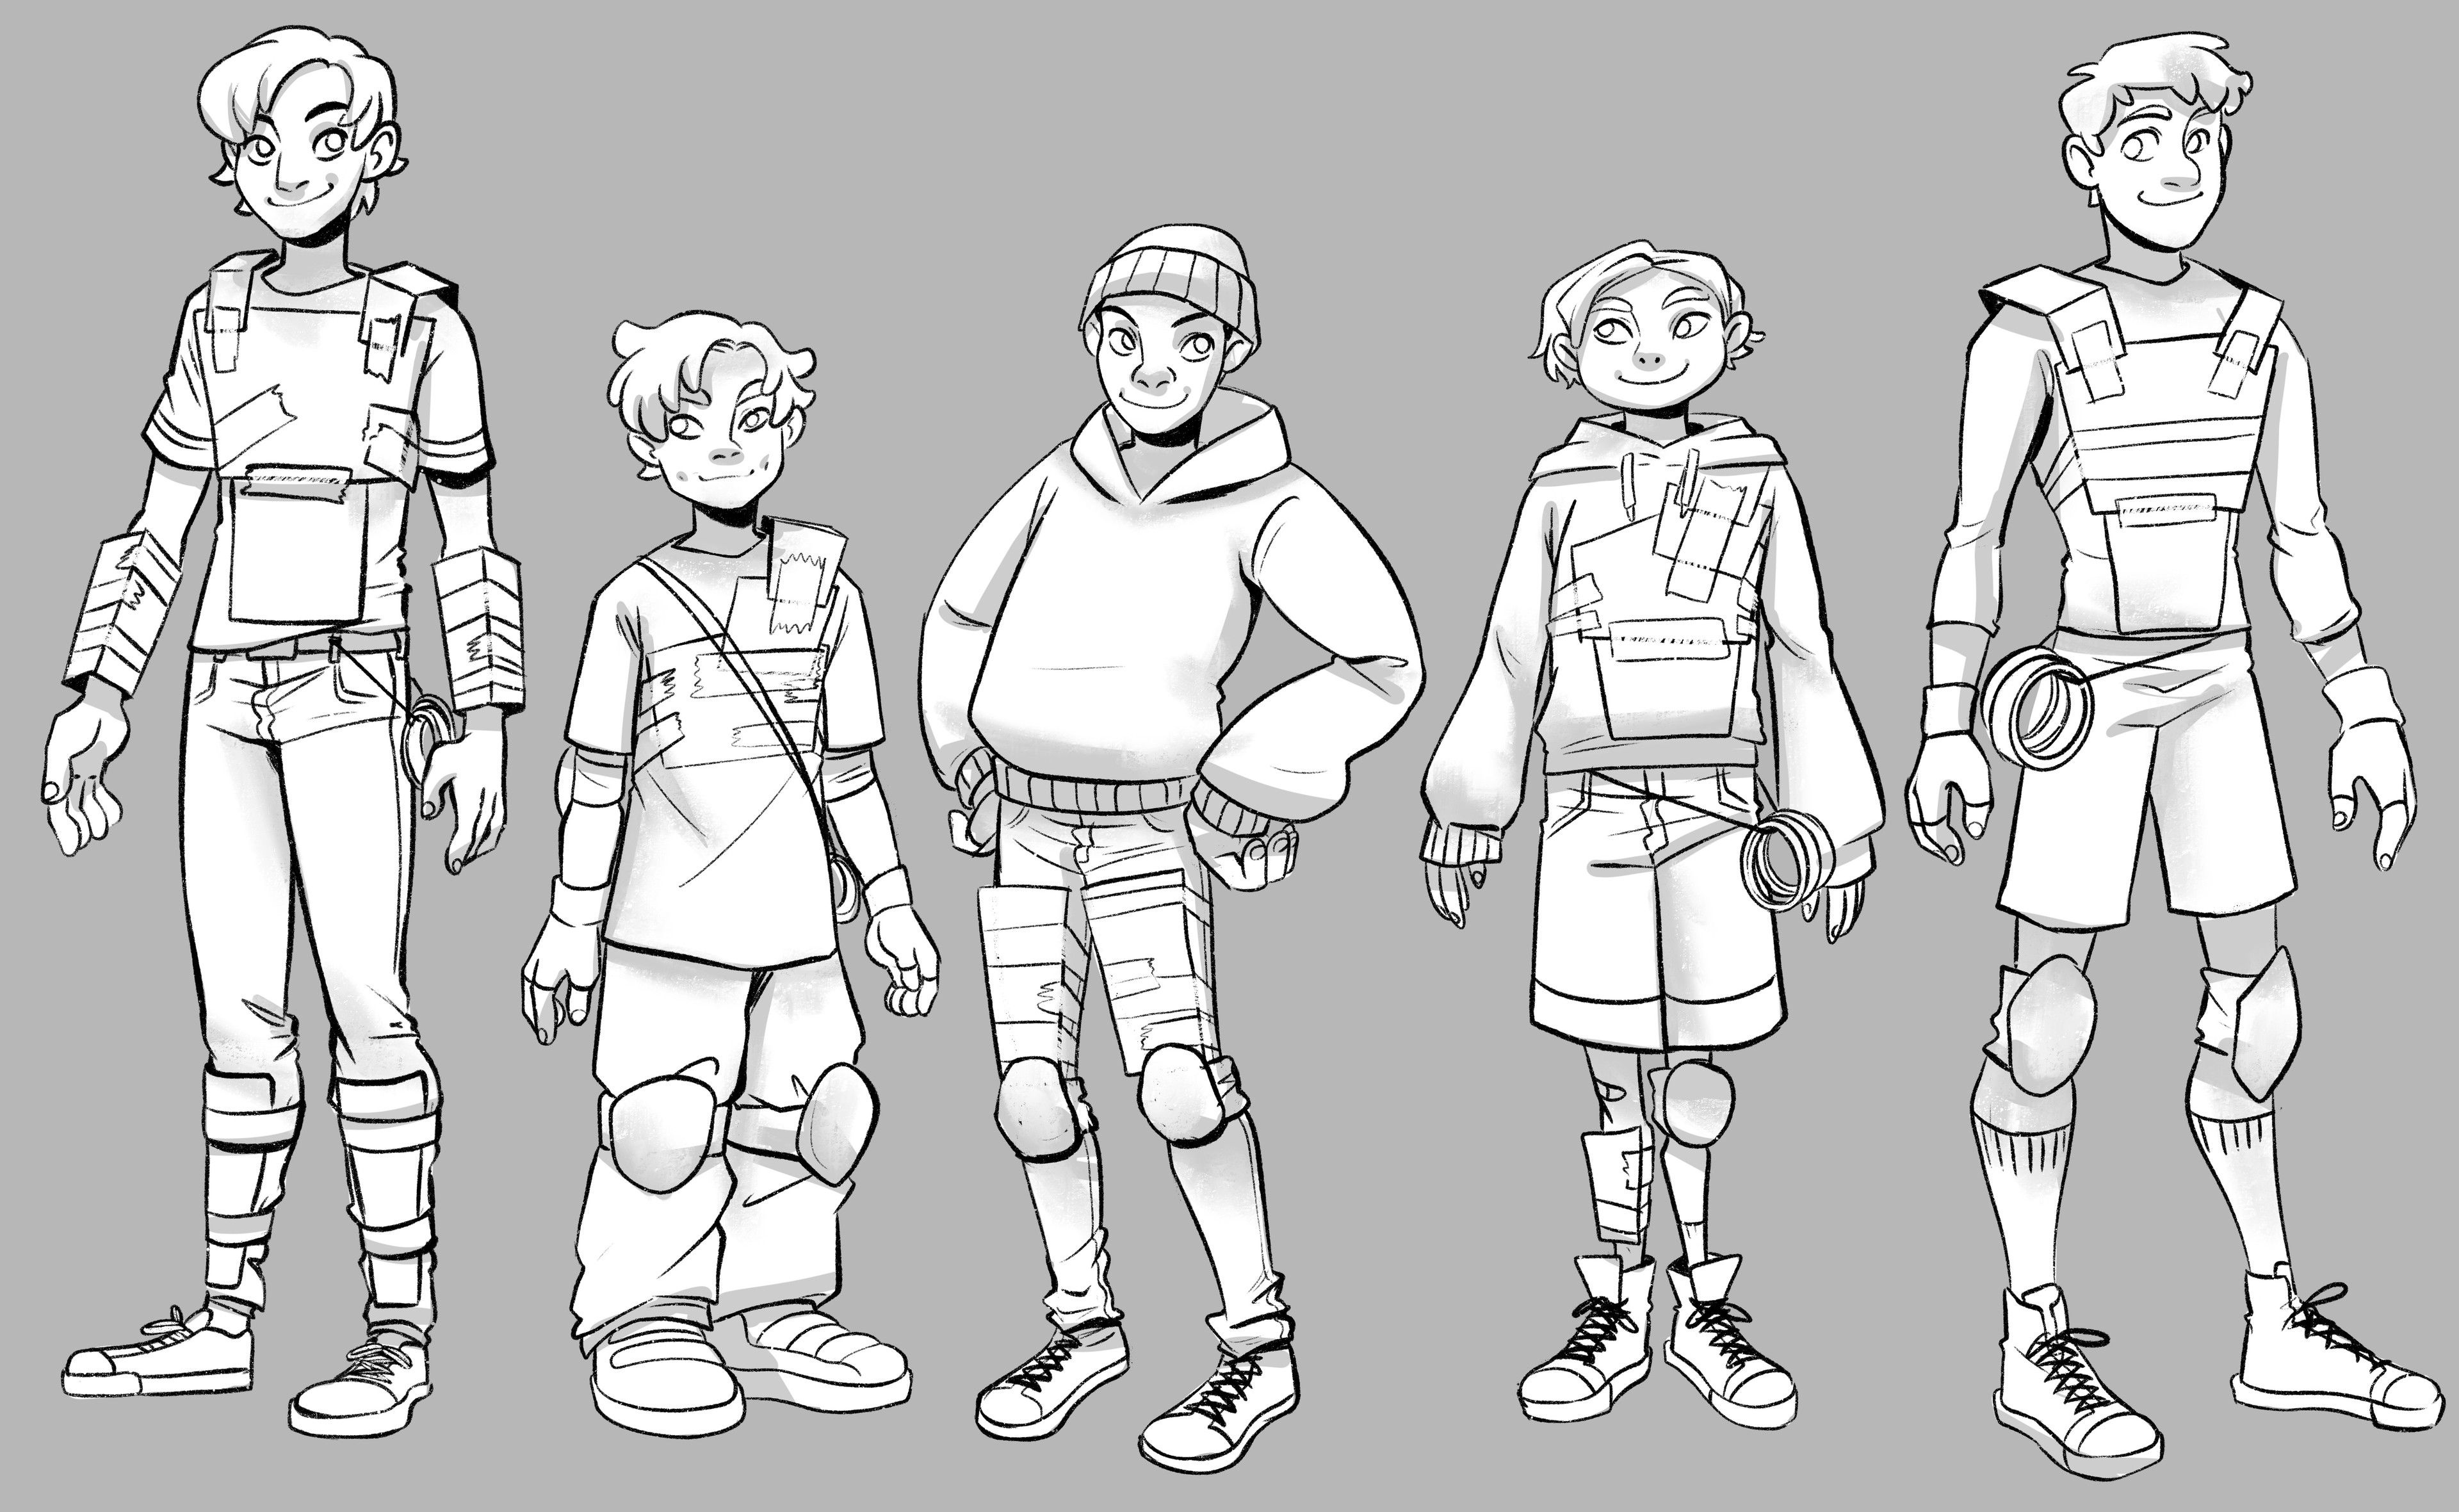 Here we were exploring other silhouettes and age difference, as well as clothing/armor. Since Jack would’ve stayed home for the first week, we wanted to show how “unprepared” he was by having handmade armor.